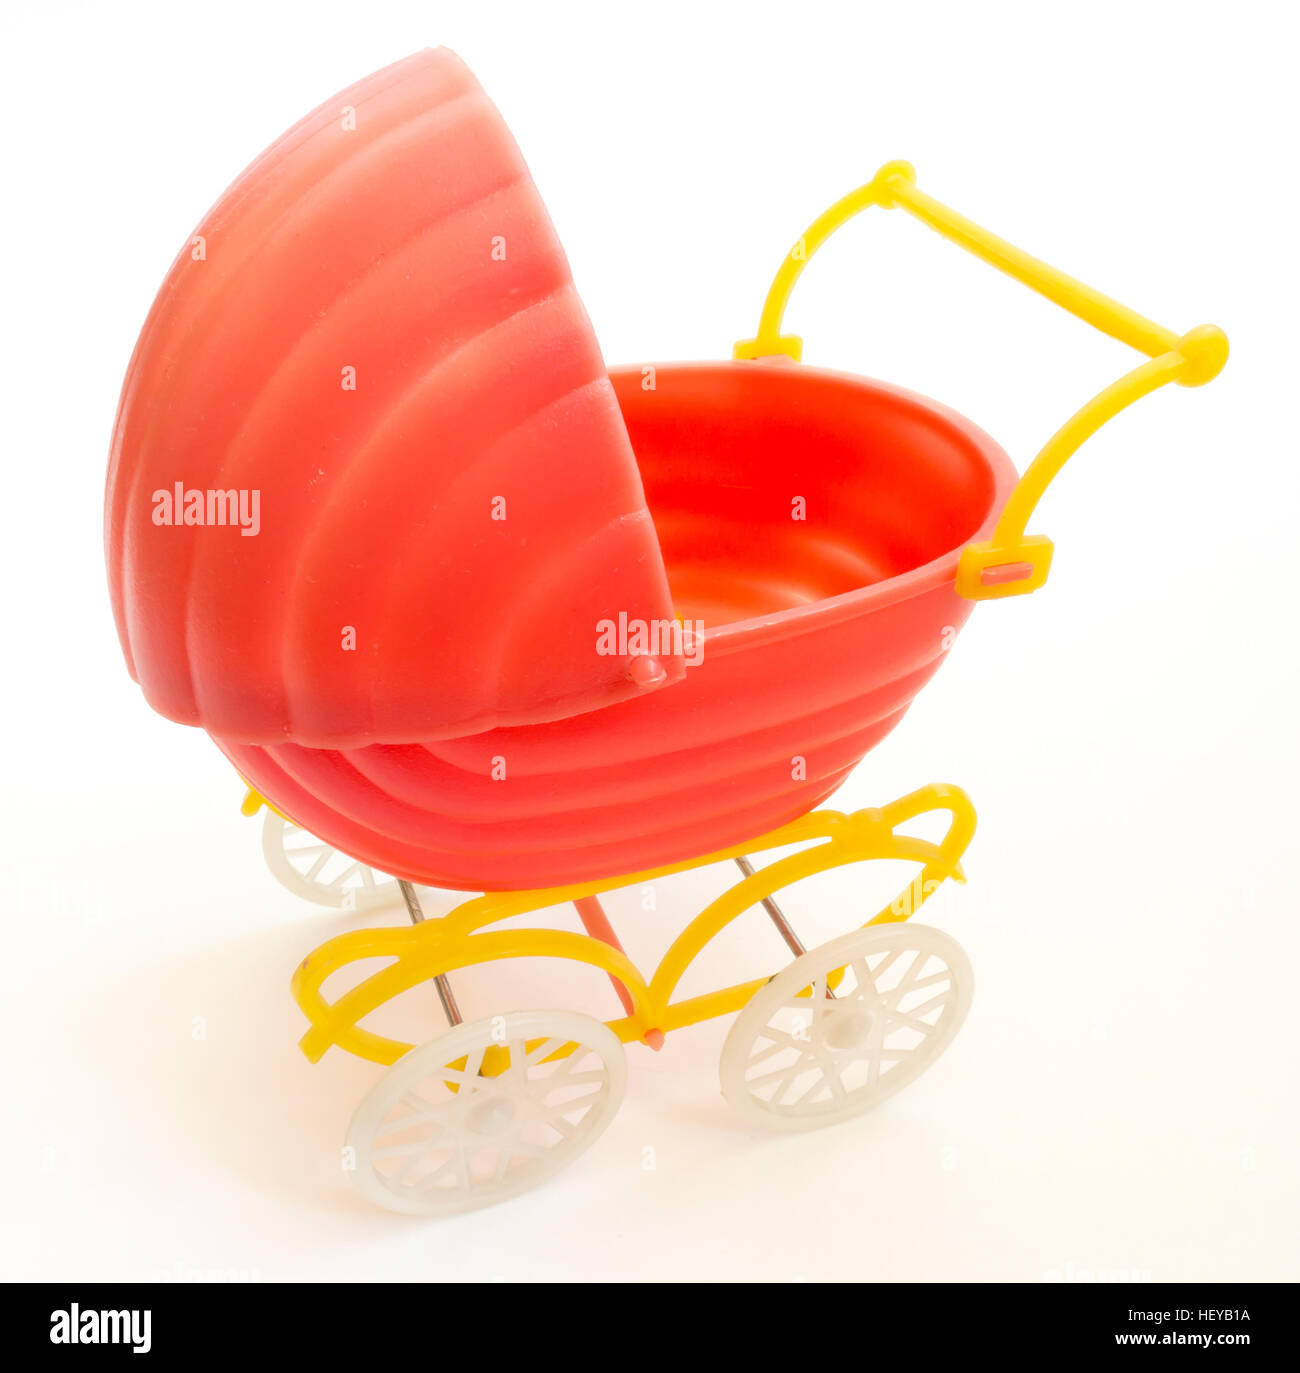 The Miniature toy baby carriage. Stock Photo